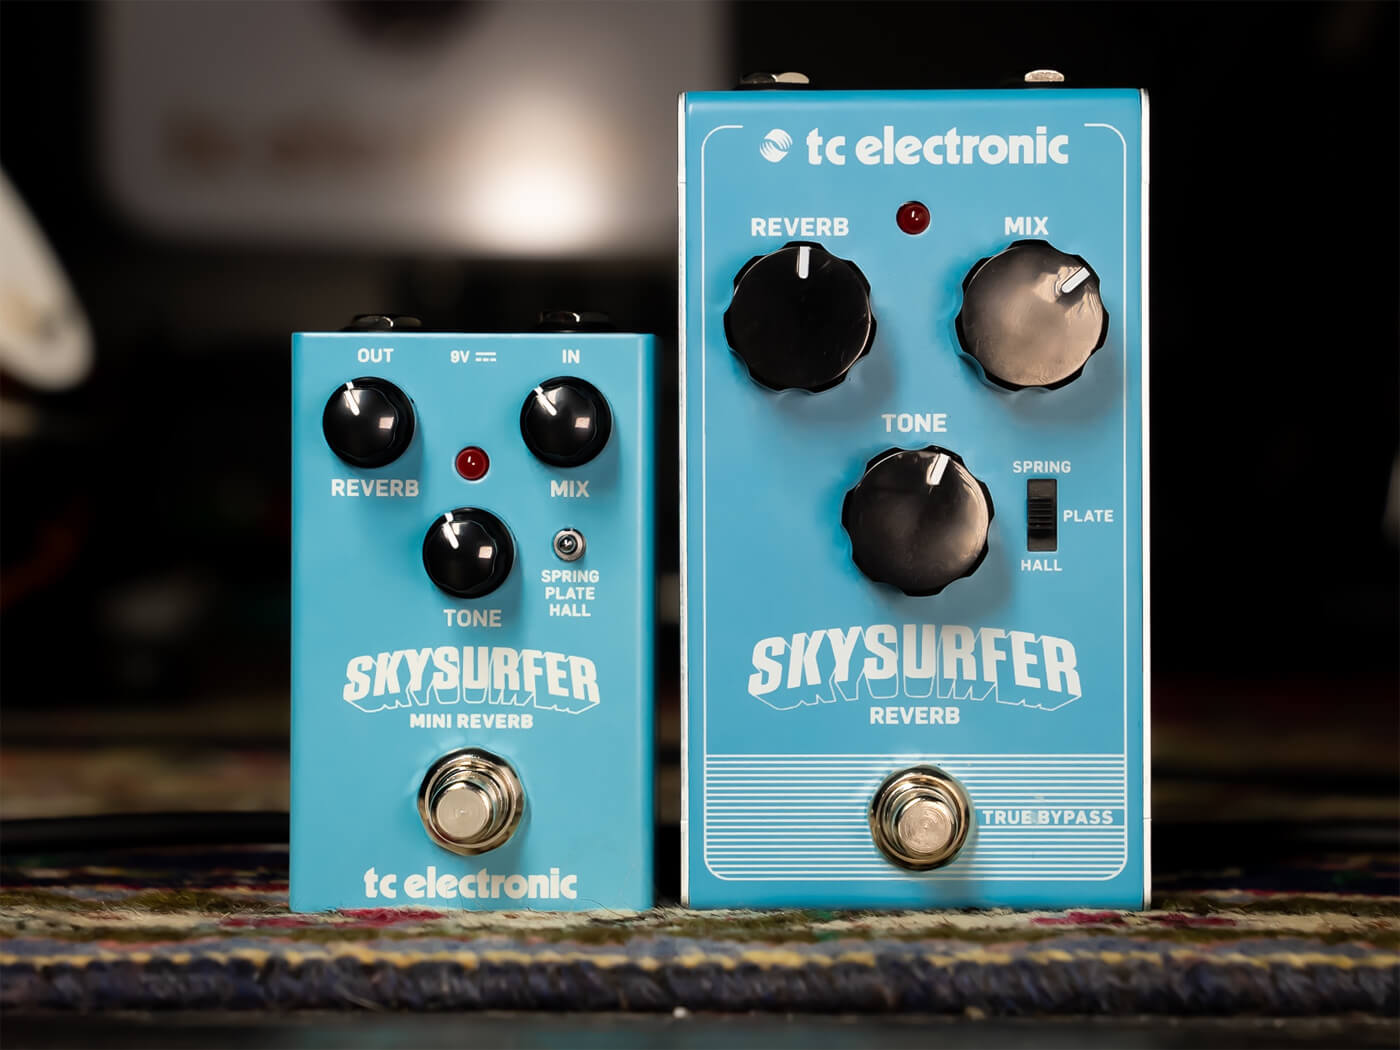 Electronic the scaled down Skysurfer Mini Reverb